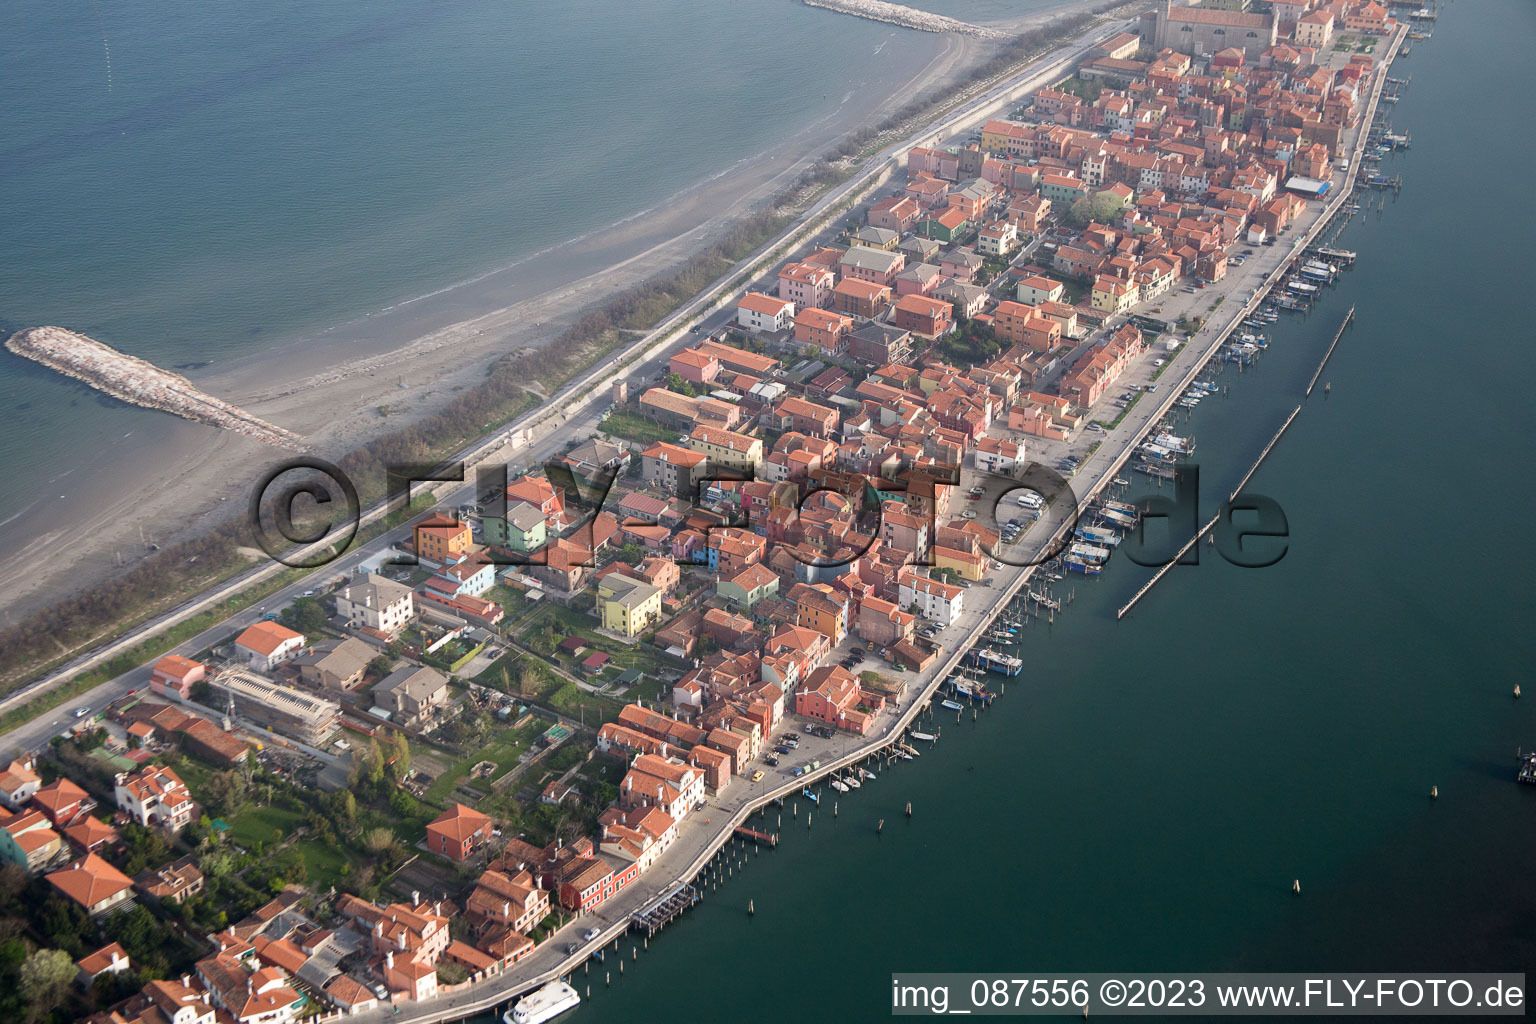 Townscape on the seacoast of Mediterranean Sea in San Vito in Veneto, Italy out of the air